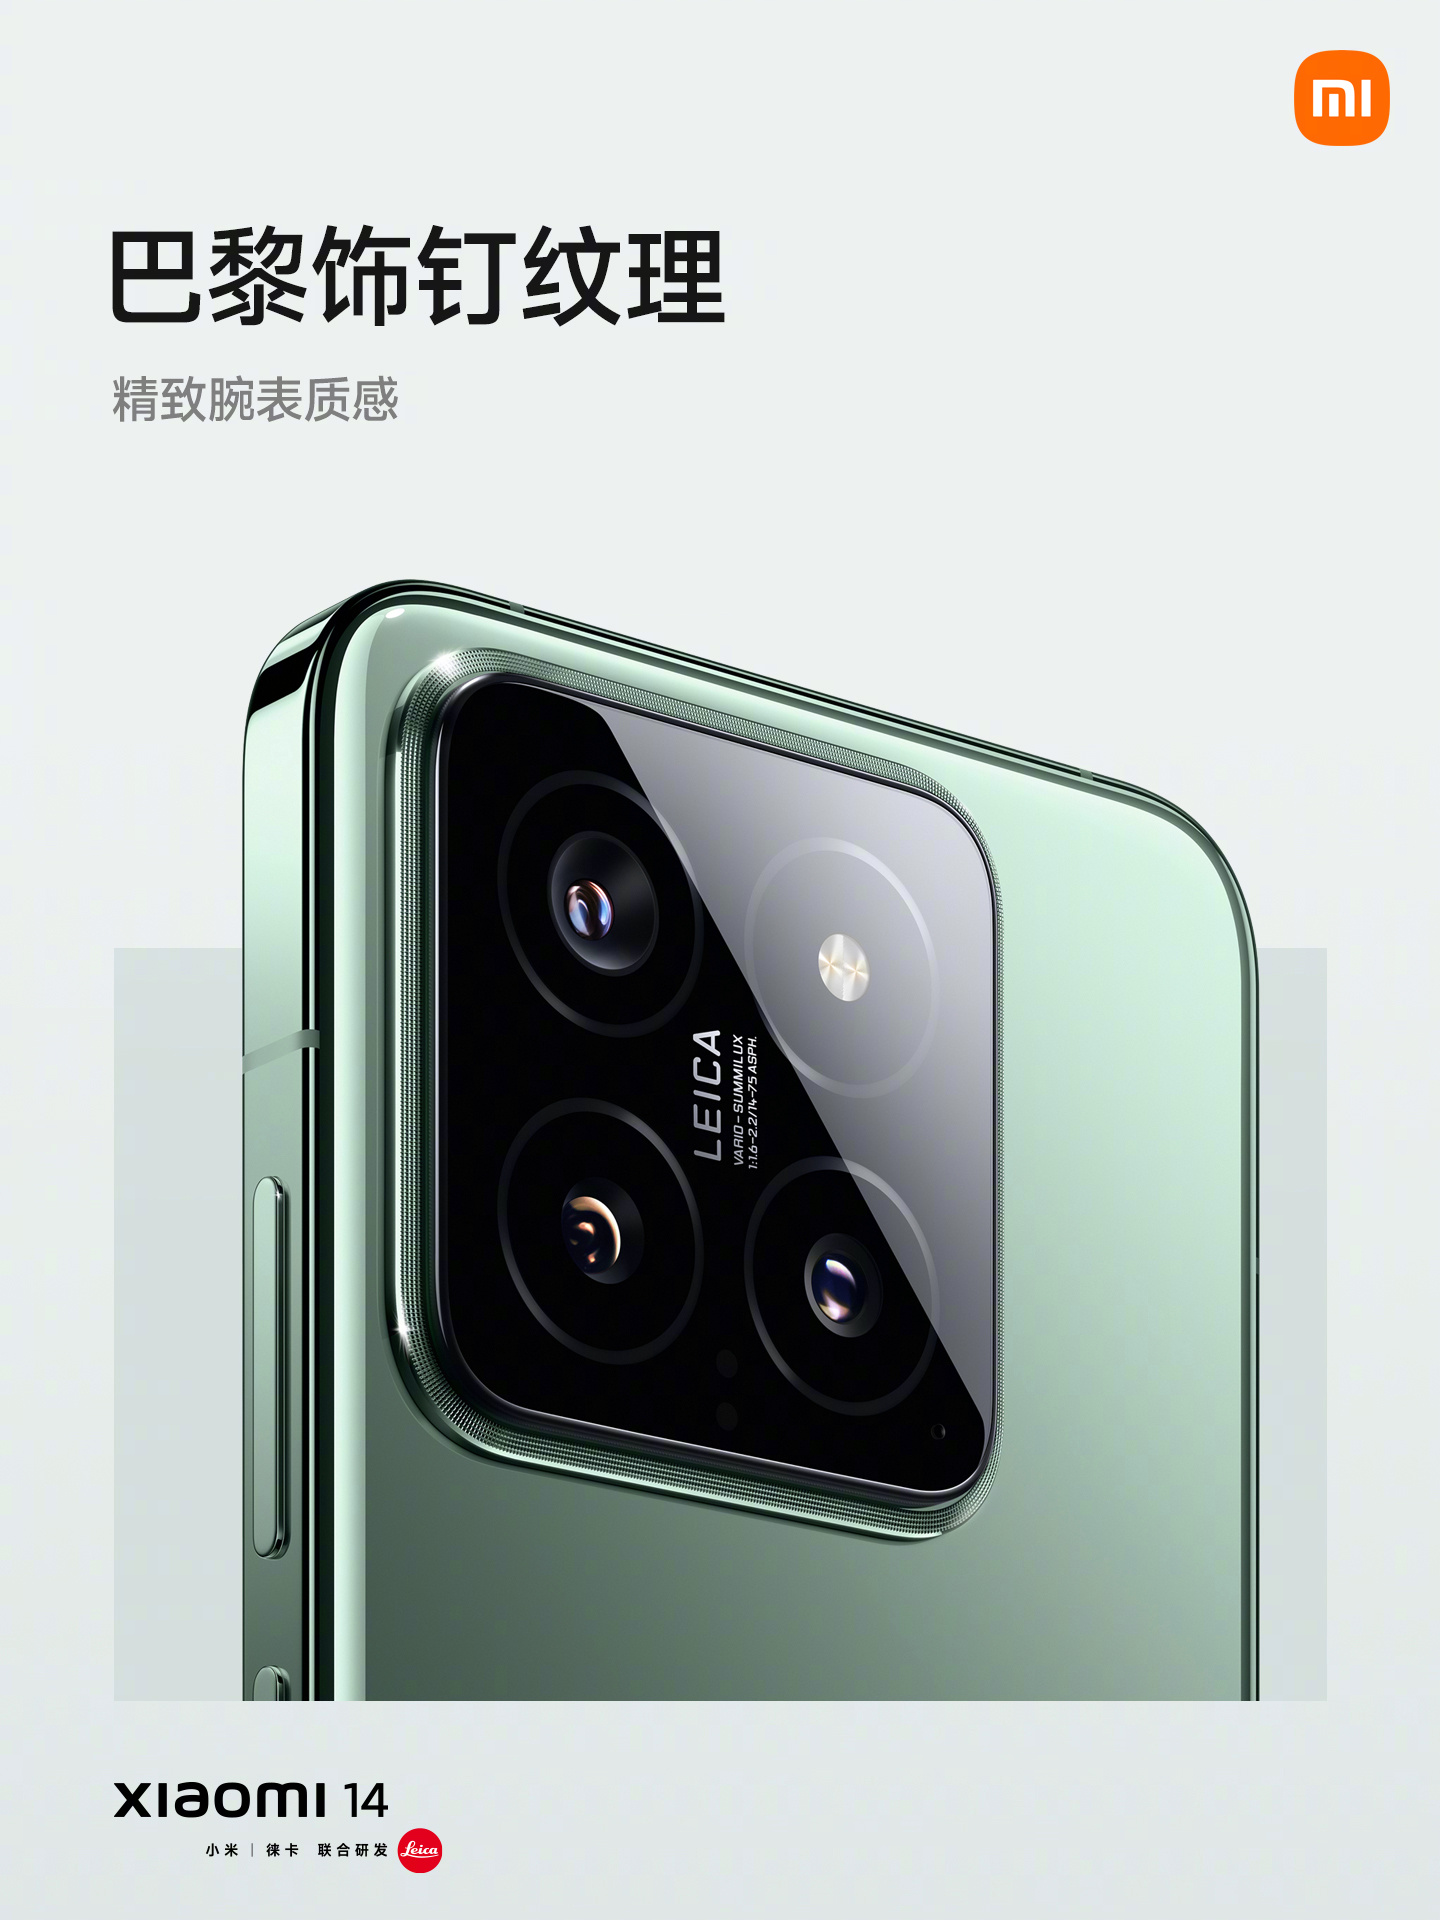 Xiaomi 14 - Snapdragon 8 Gen 3, three 50MP cameras, 120Hz record-brightness  display, IP68 protection and the new Hyper priced from $545